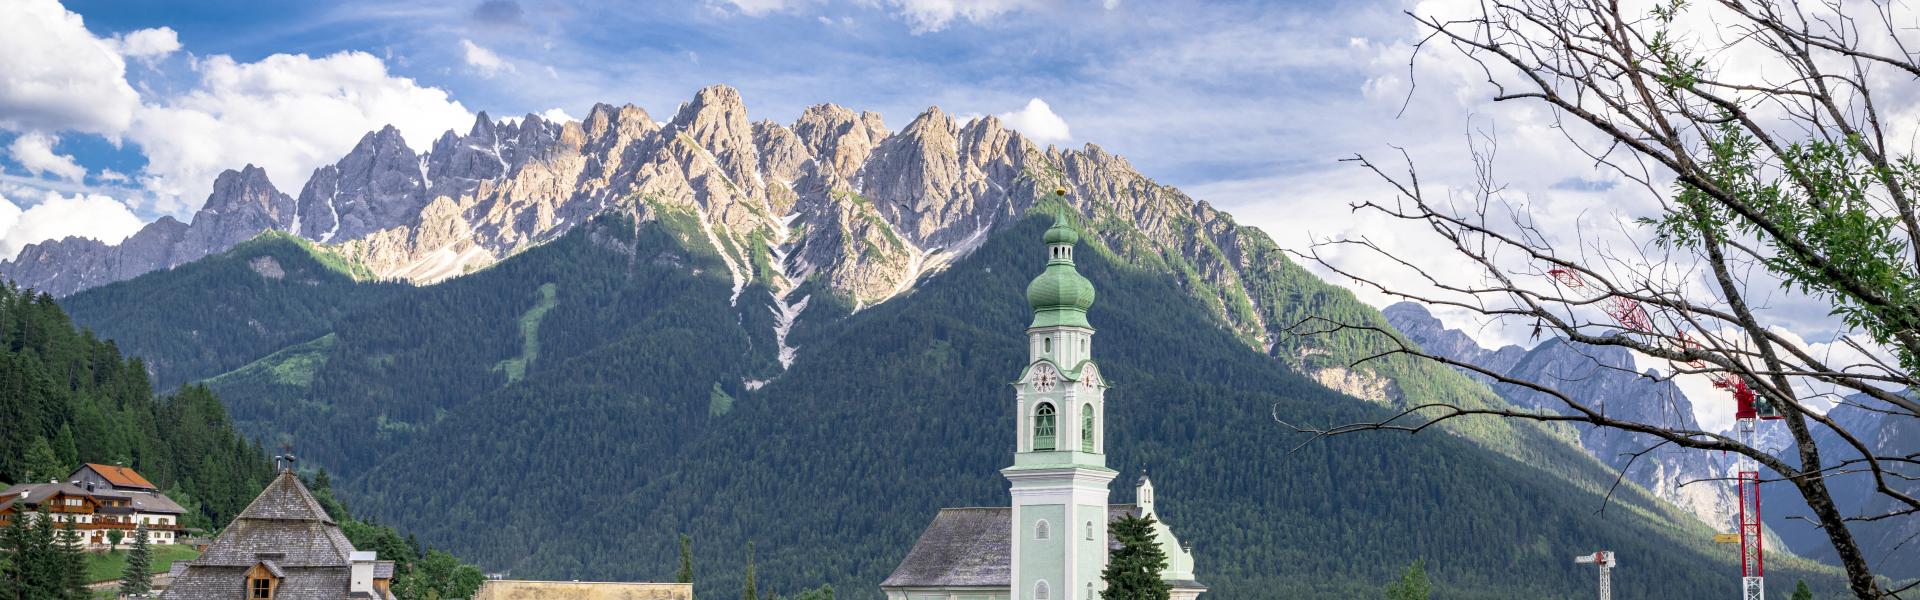 Val Pusteria Town View